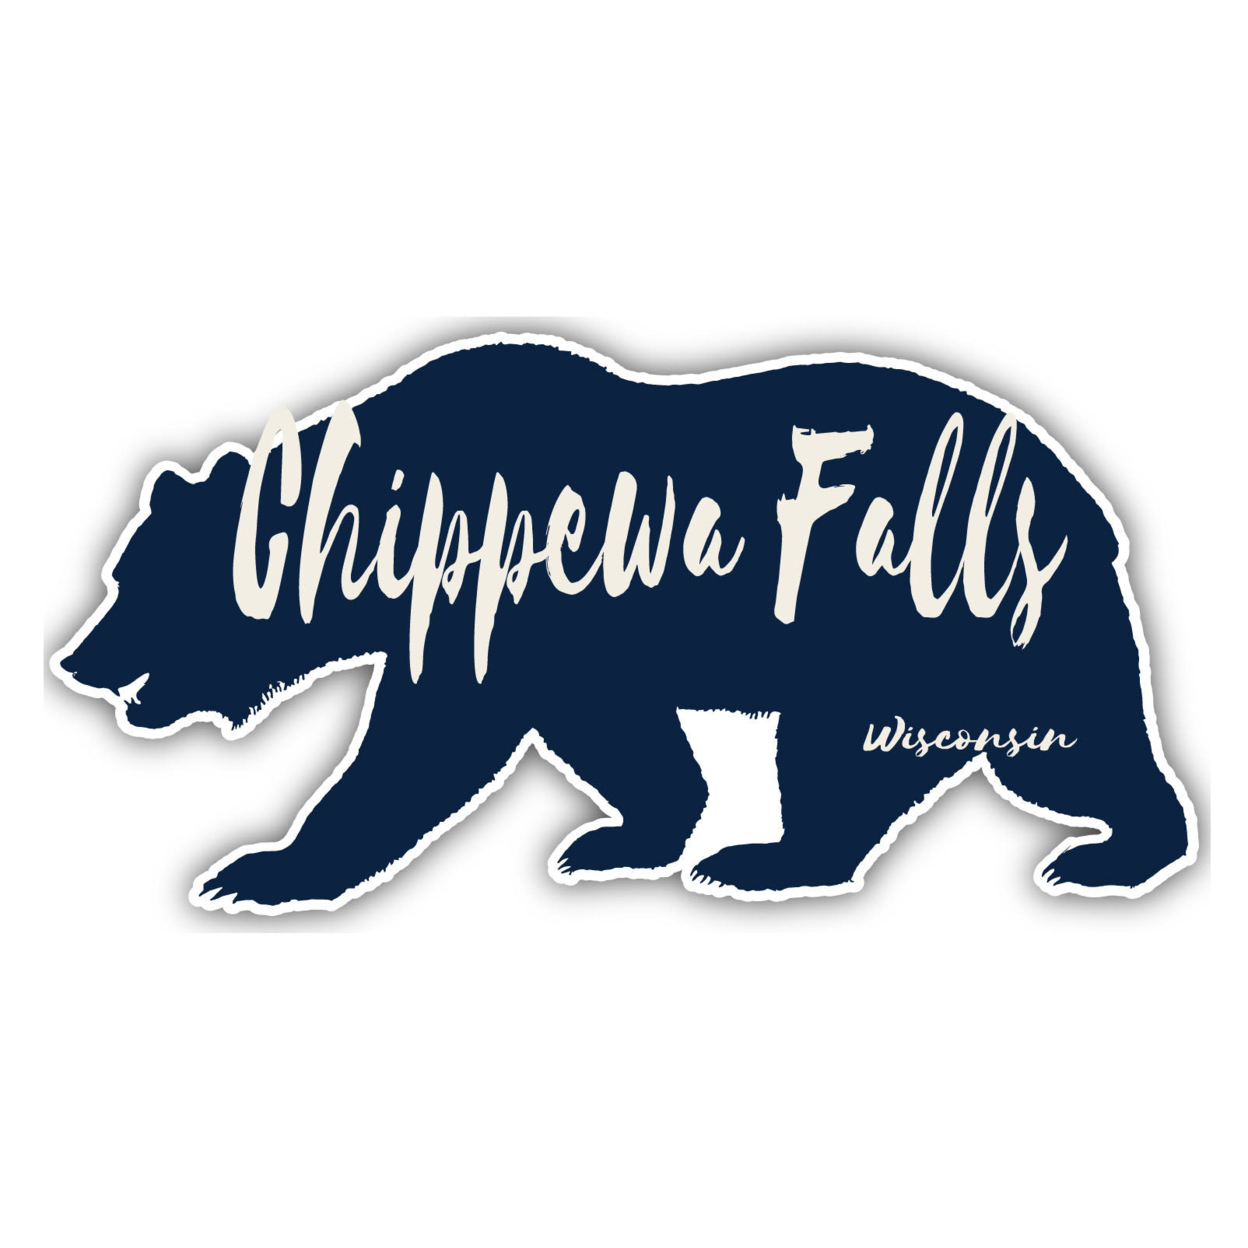 Chippewa Falls Wisconsin Souvenir Decorative Stickers (Choose Theme And Size) - 4-Pack, 12-Inch, Bear